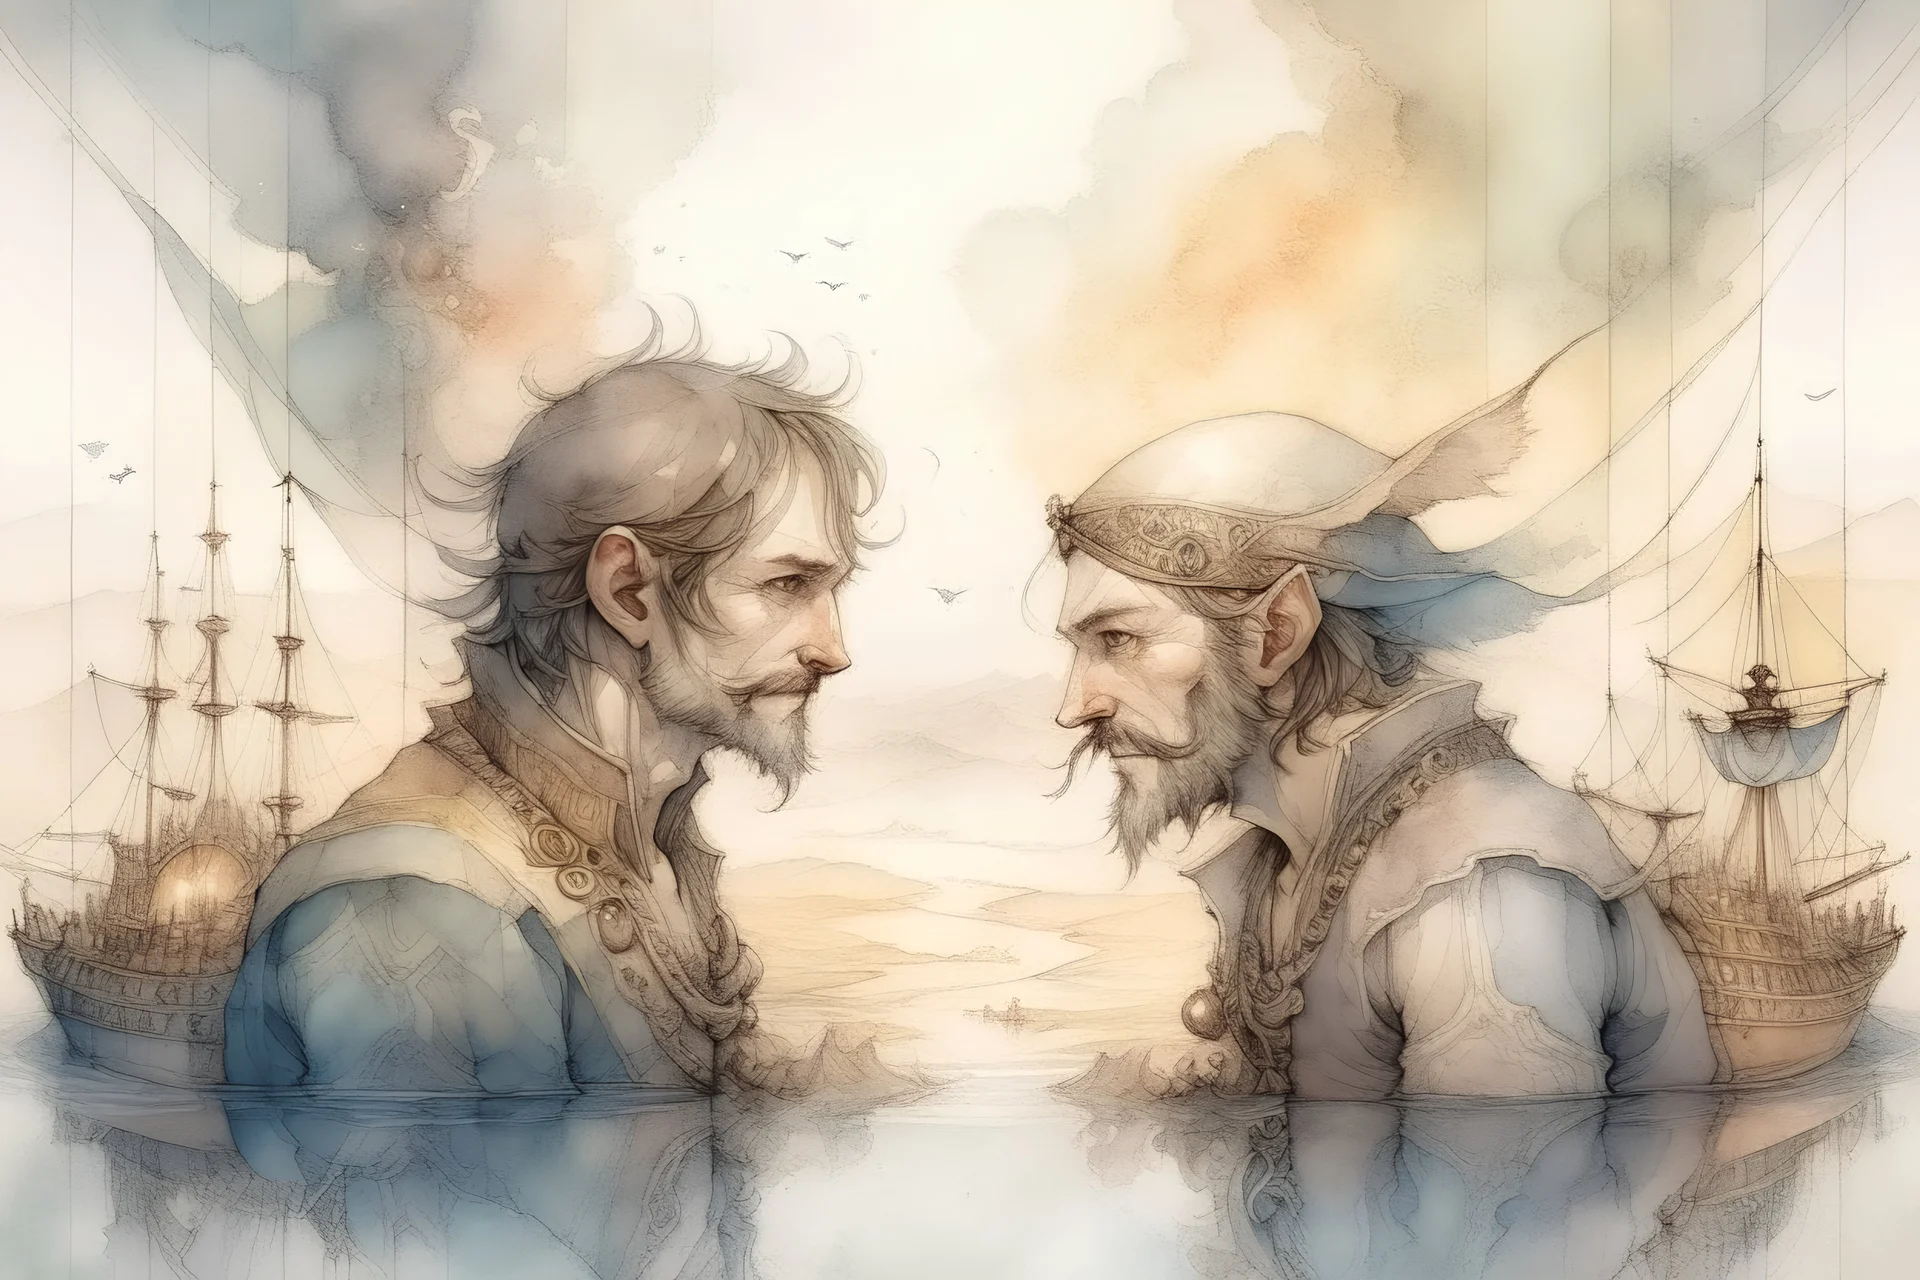 The place where the Dream and its followers live. A reflection of the sky. Watercolor, fine drawing of two fighting pirate men , pixel graphics, lots of details, delicate sensuality, realistic, high quality, work of art, hyperdetalization, professional, filigree, hazy haze, hyperrealism, professional, transparent, delicate pastel tones, back lighting, contrast, fantastic, nature+space, Milky Way, fabulous, unreal, translucent,